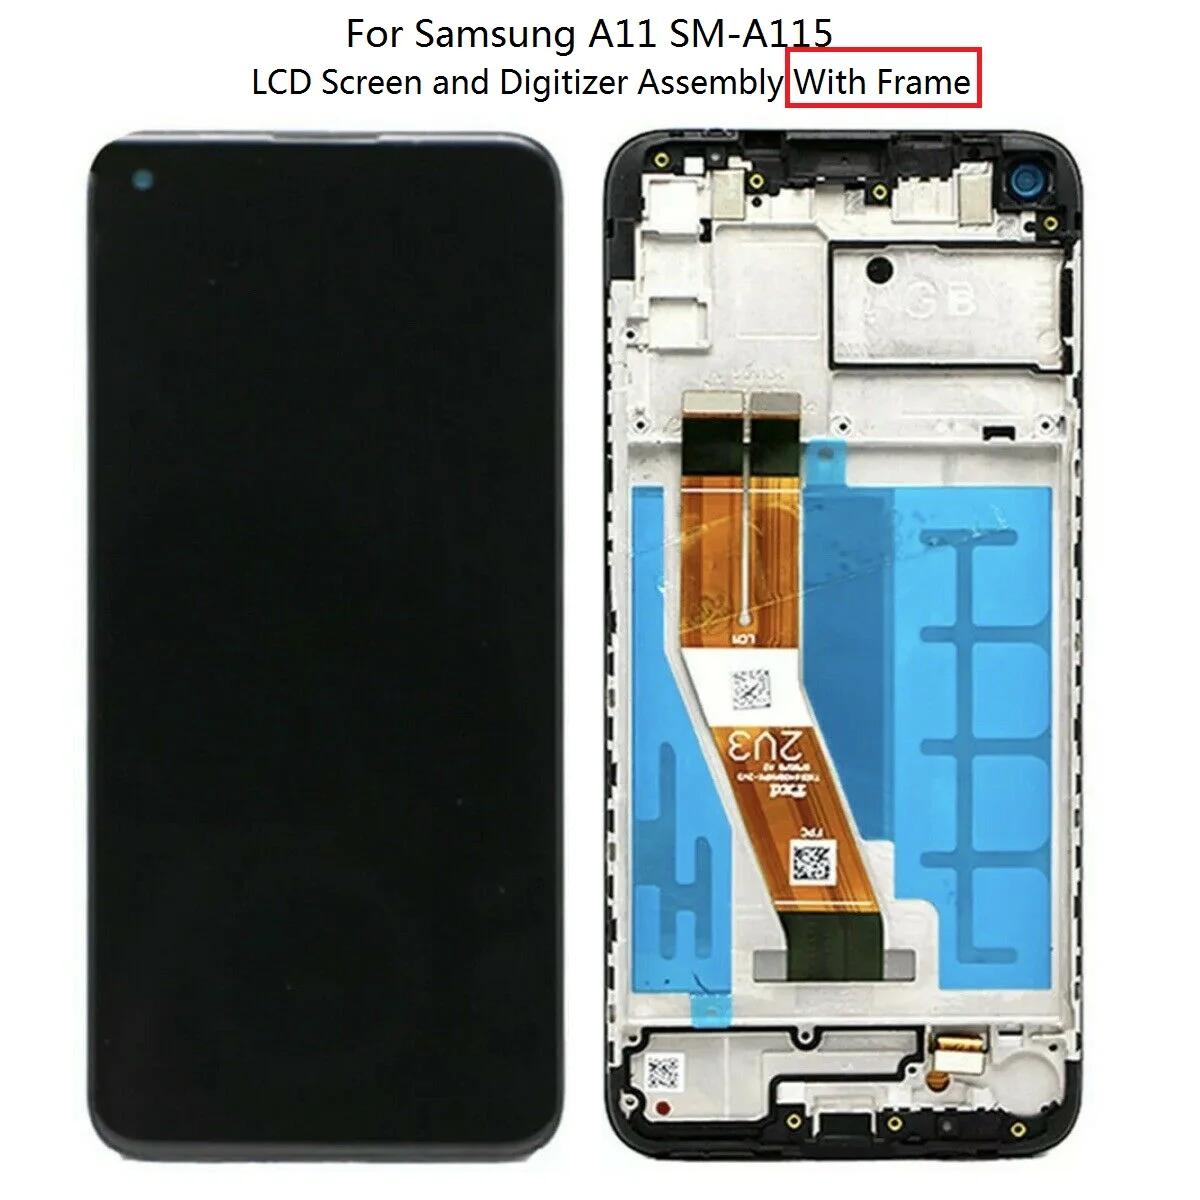 

OEM Original LCD Screen Display and Digitizer Touch Screen Assembly With Frame Repair Part for Samsung Galaxy A11 SM-A115 Black